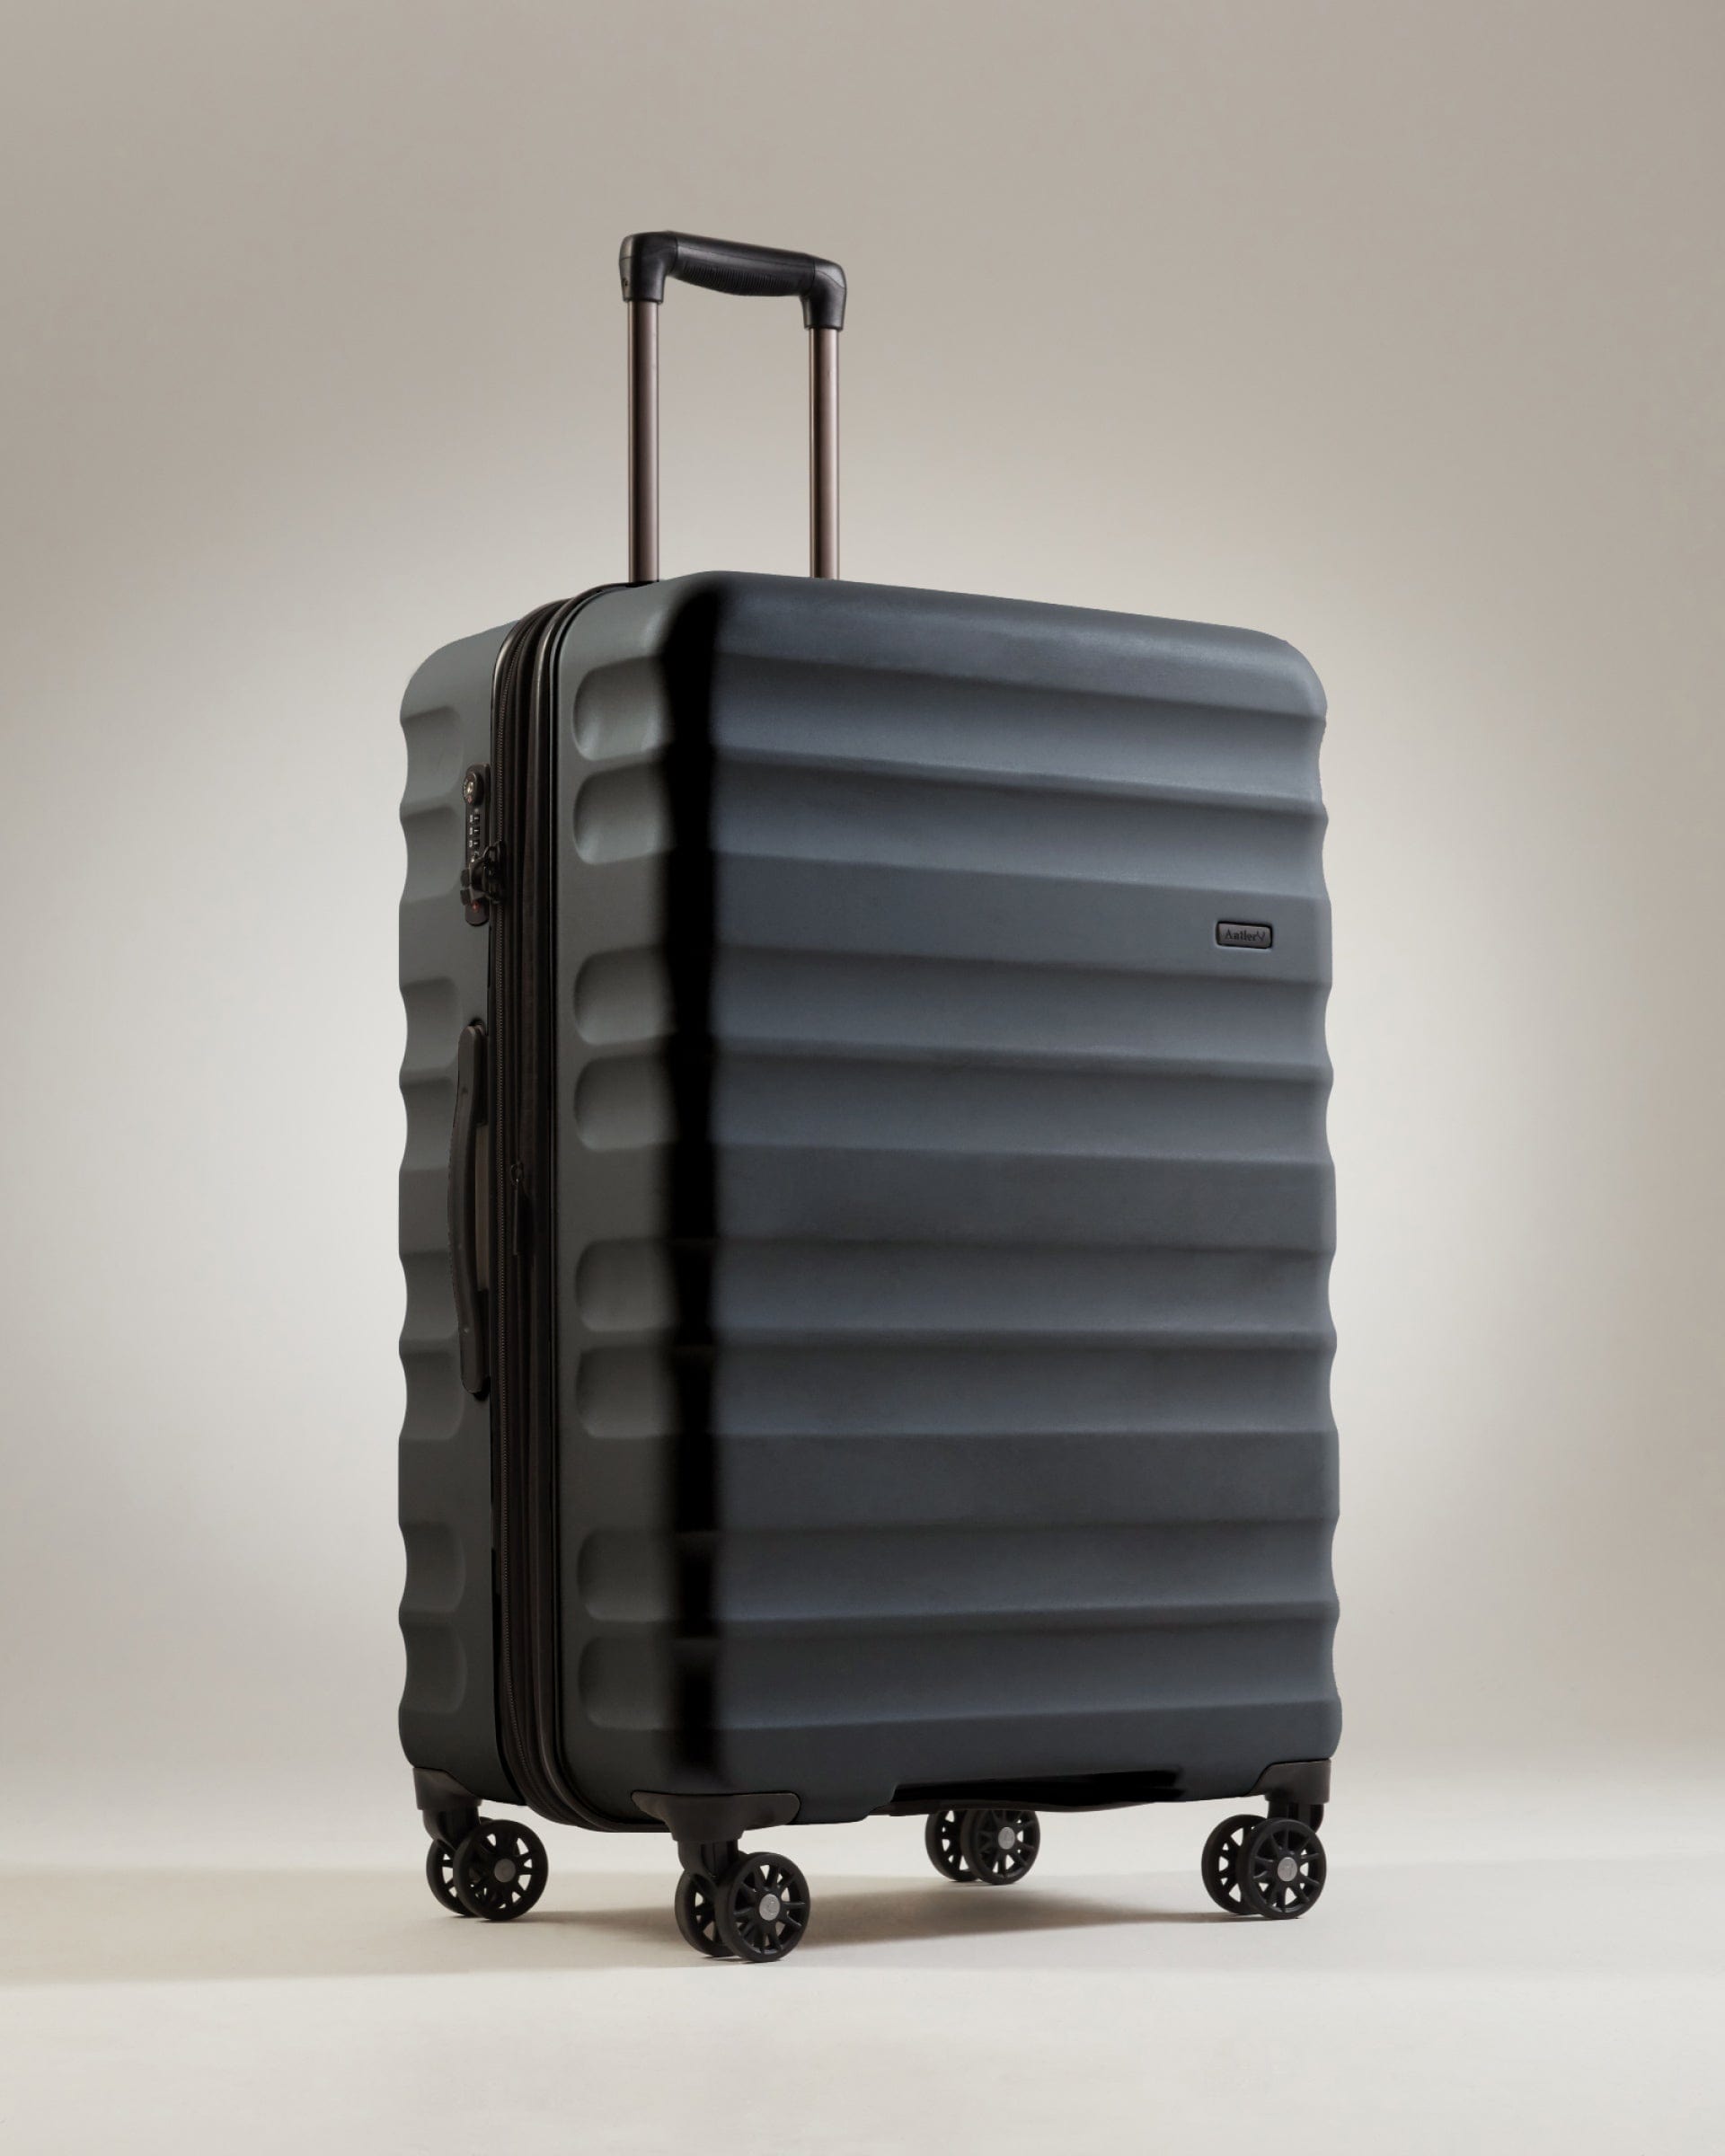 View Antler Clifton Large Suitcase In Slate Size 35 x 52 x 80 cm information